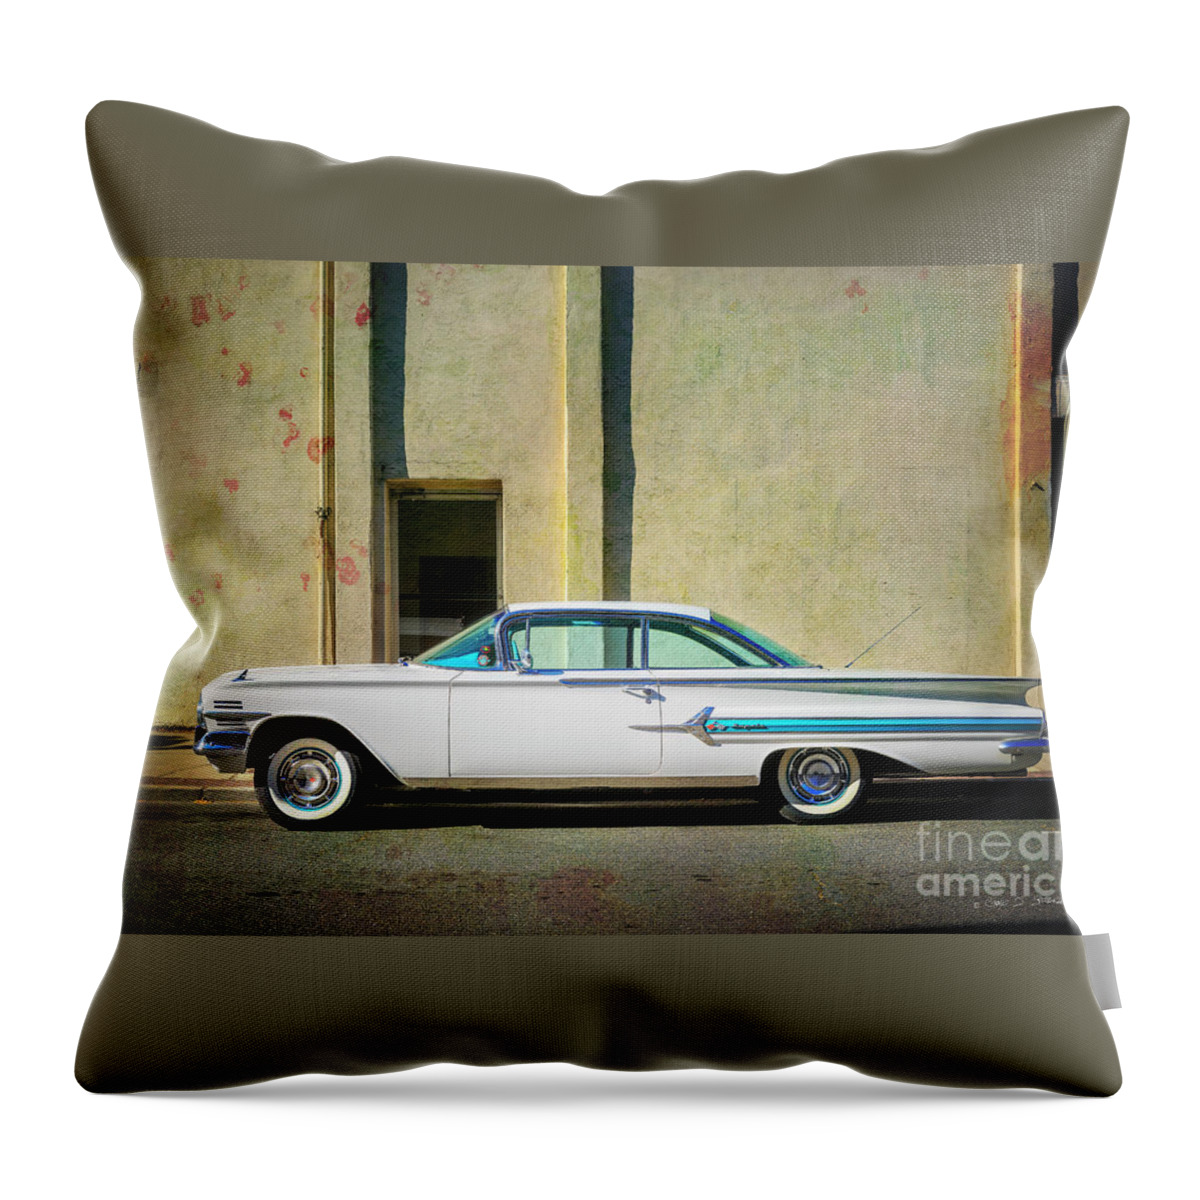 Tranquility Throw Pillow featuring the photograph Hot Rod Impala by Craig J Satterlee